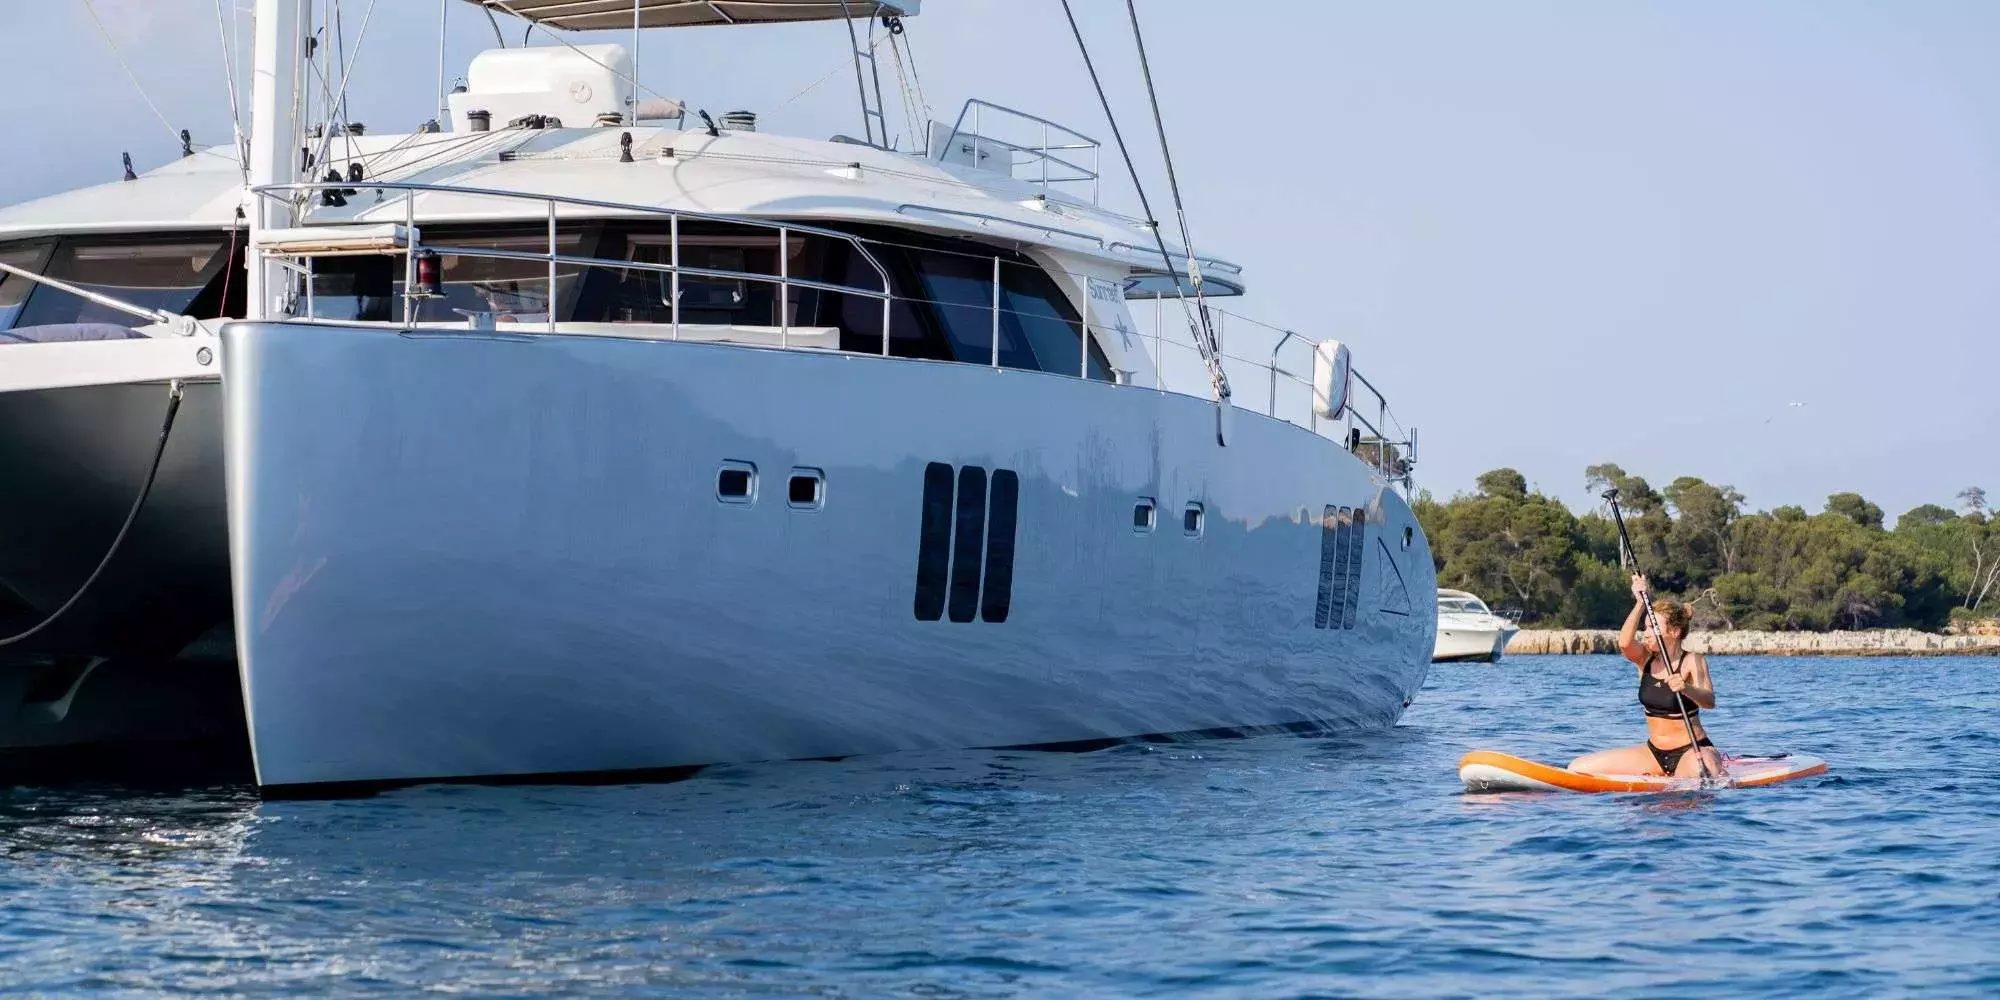 Seazen II by Sunreef Yachts - Special Offer for a private Luxury Catamaran Charter in St Tropez with a crew